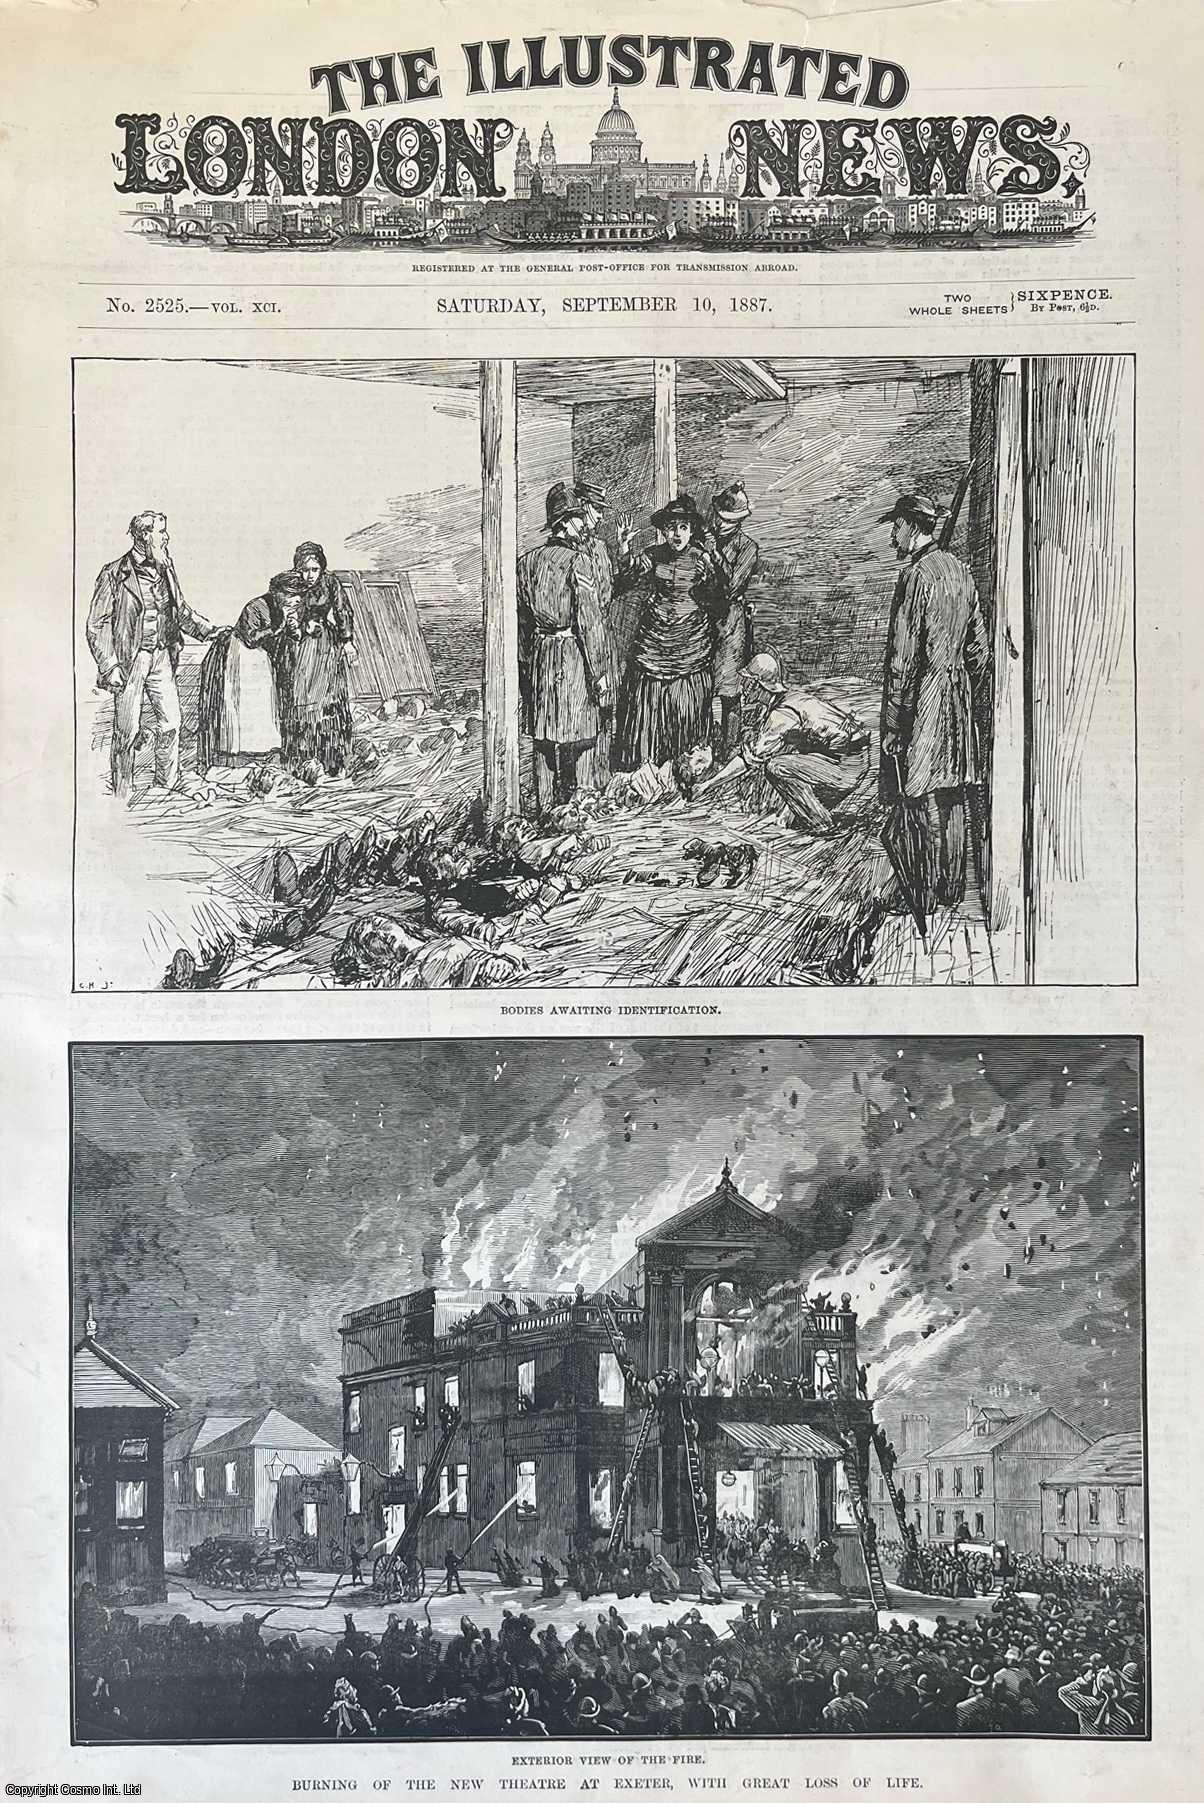 EXETER - Burning of the New Theatre at Exeter, with Great Loss of Life. A collection of woodcut engravings, with brief accompanying text continuing overleaf, from the Illustrated London News, 1887.